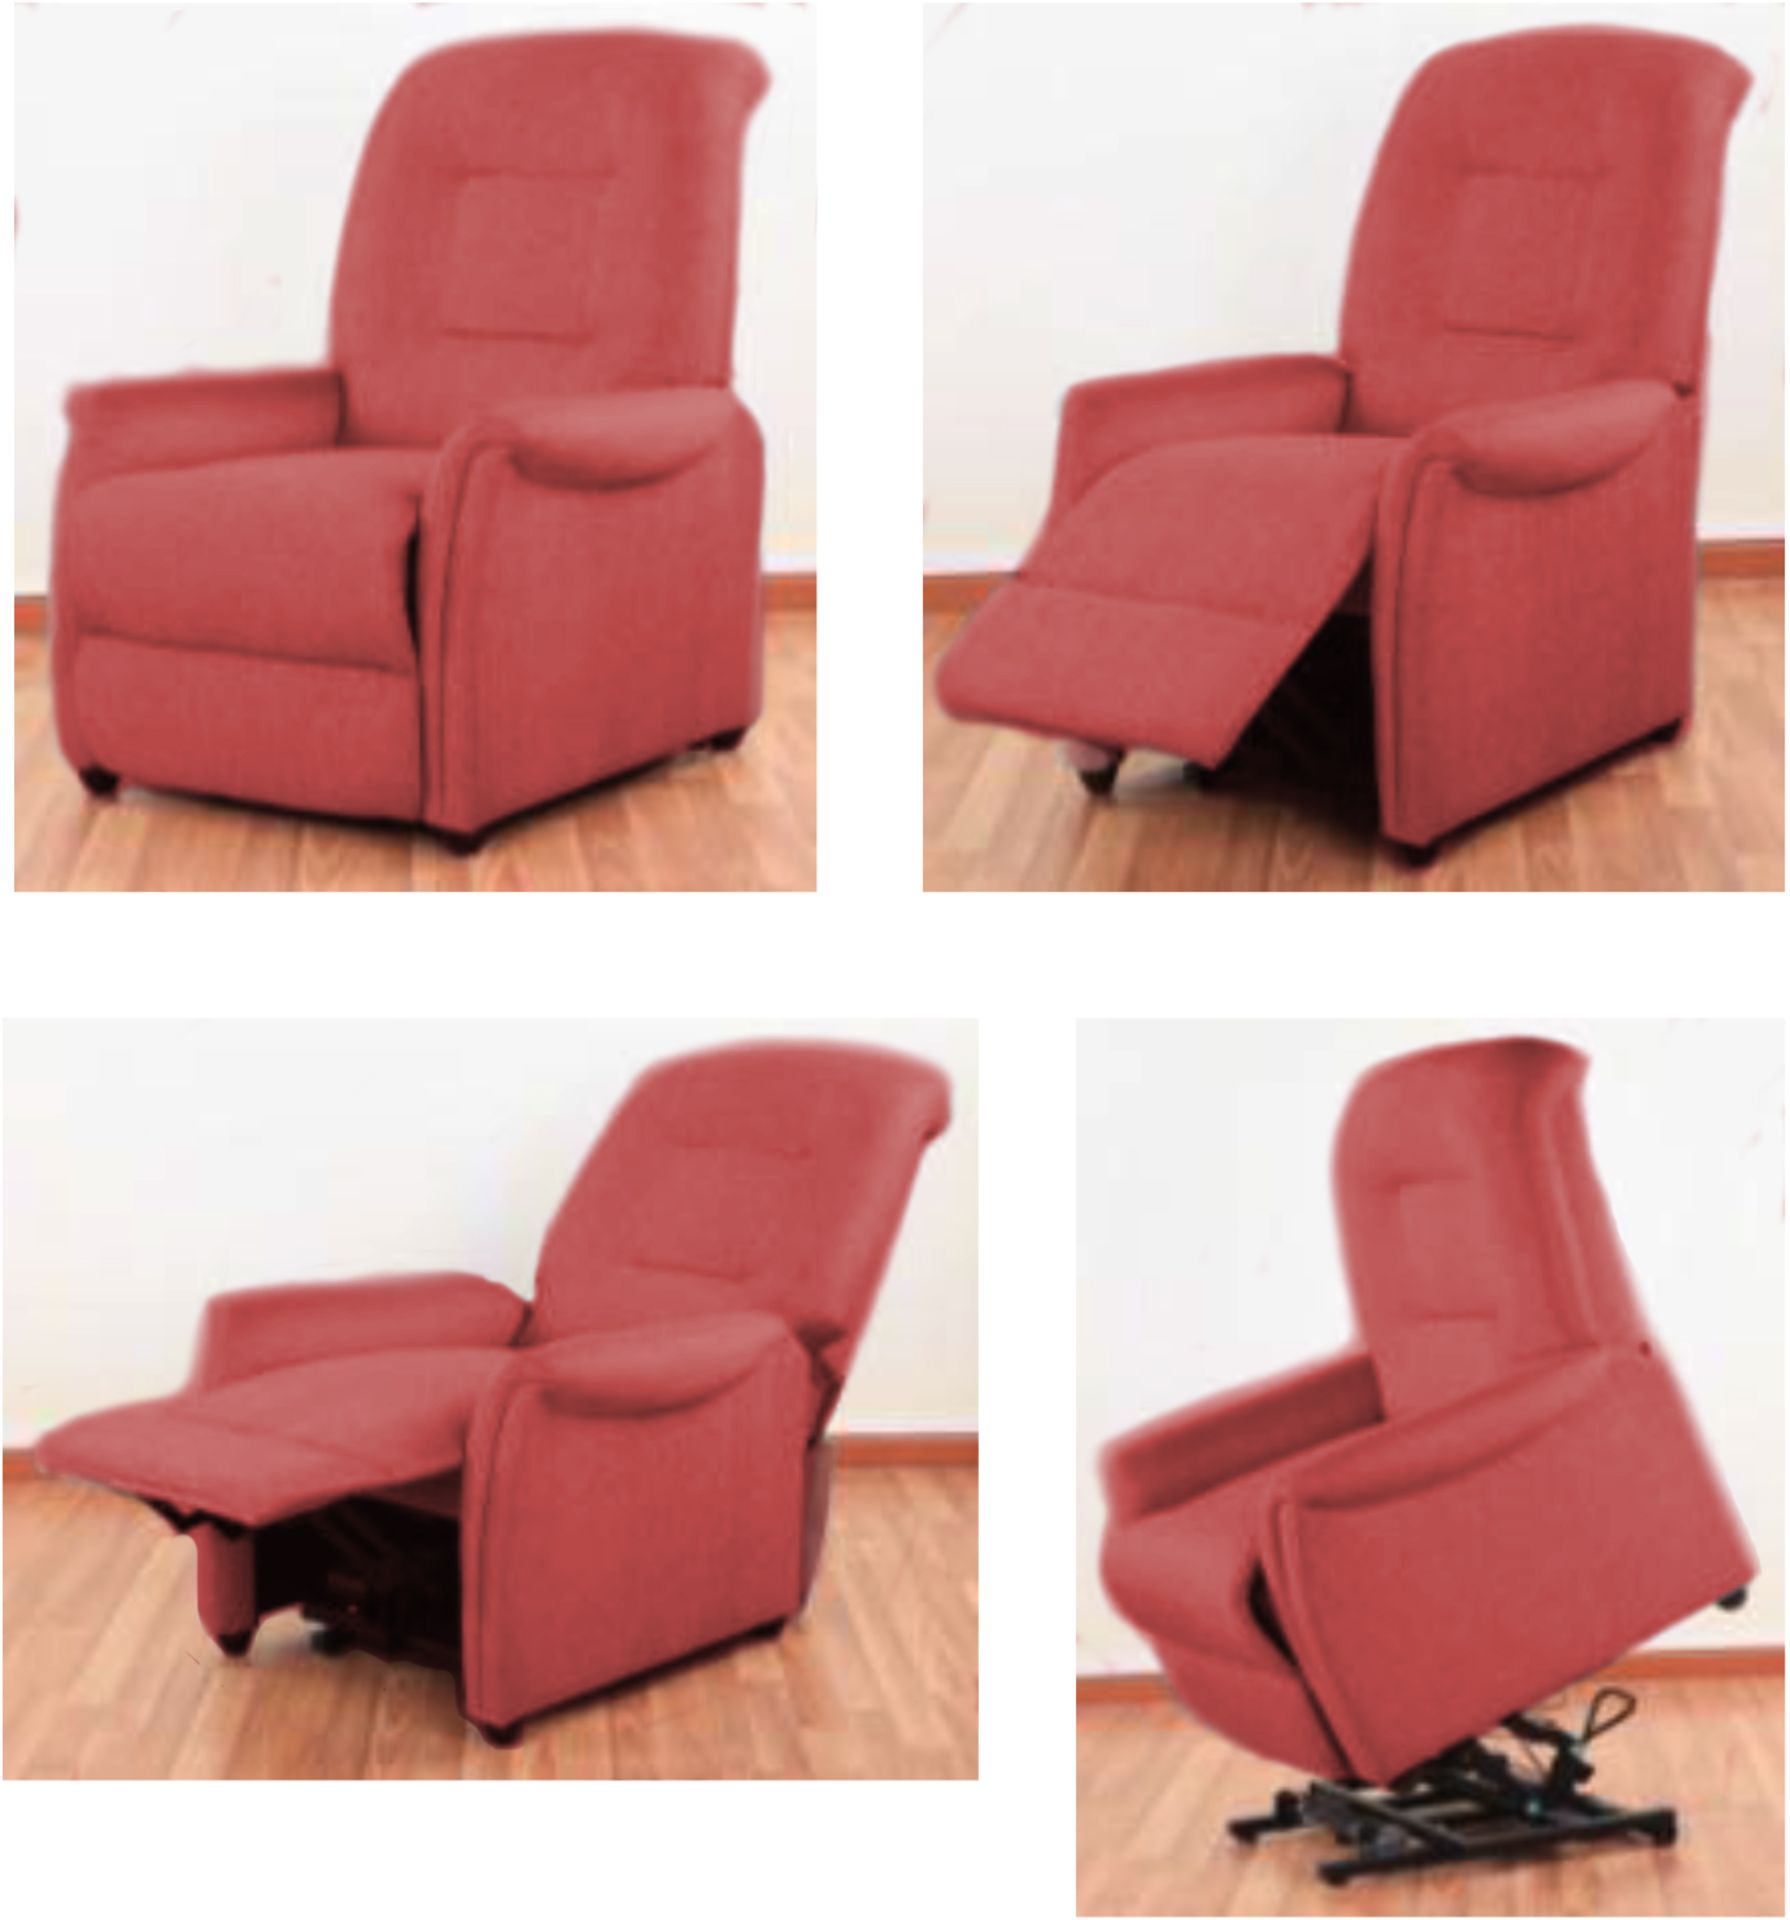 V Grade A Red Velour Rise & Recline Electric Chair With Remote Control Brand New In Box RRP £999 - Image 2 of 2